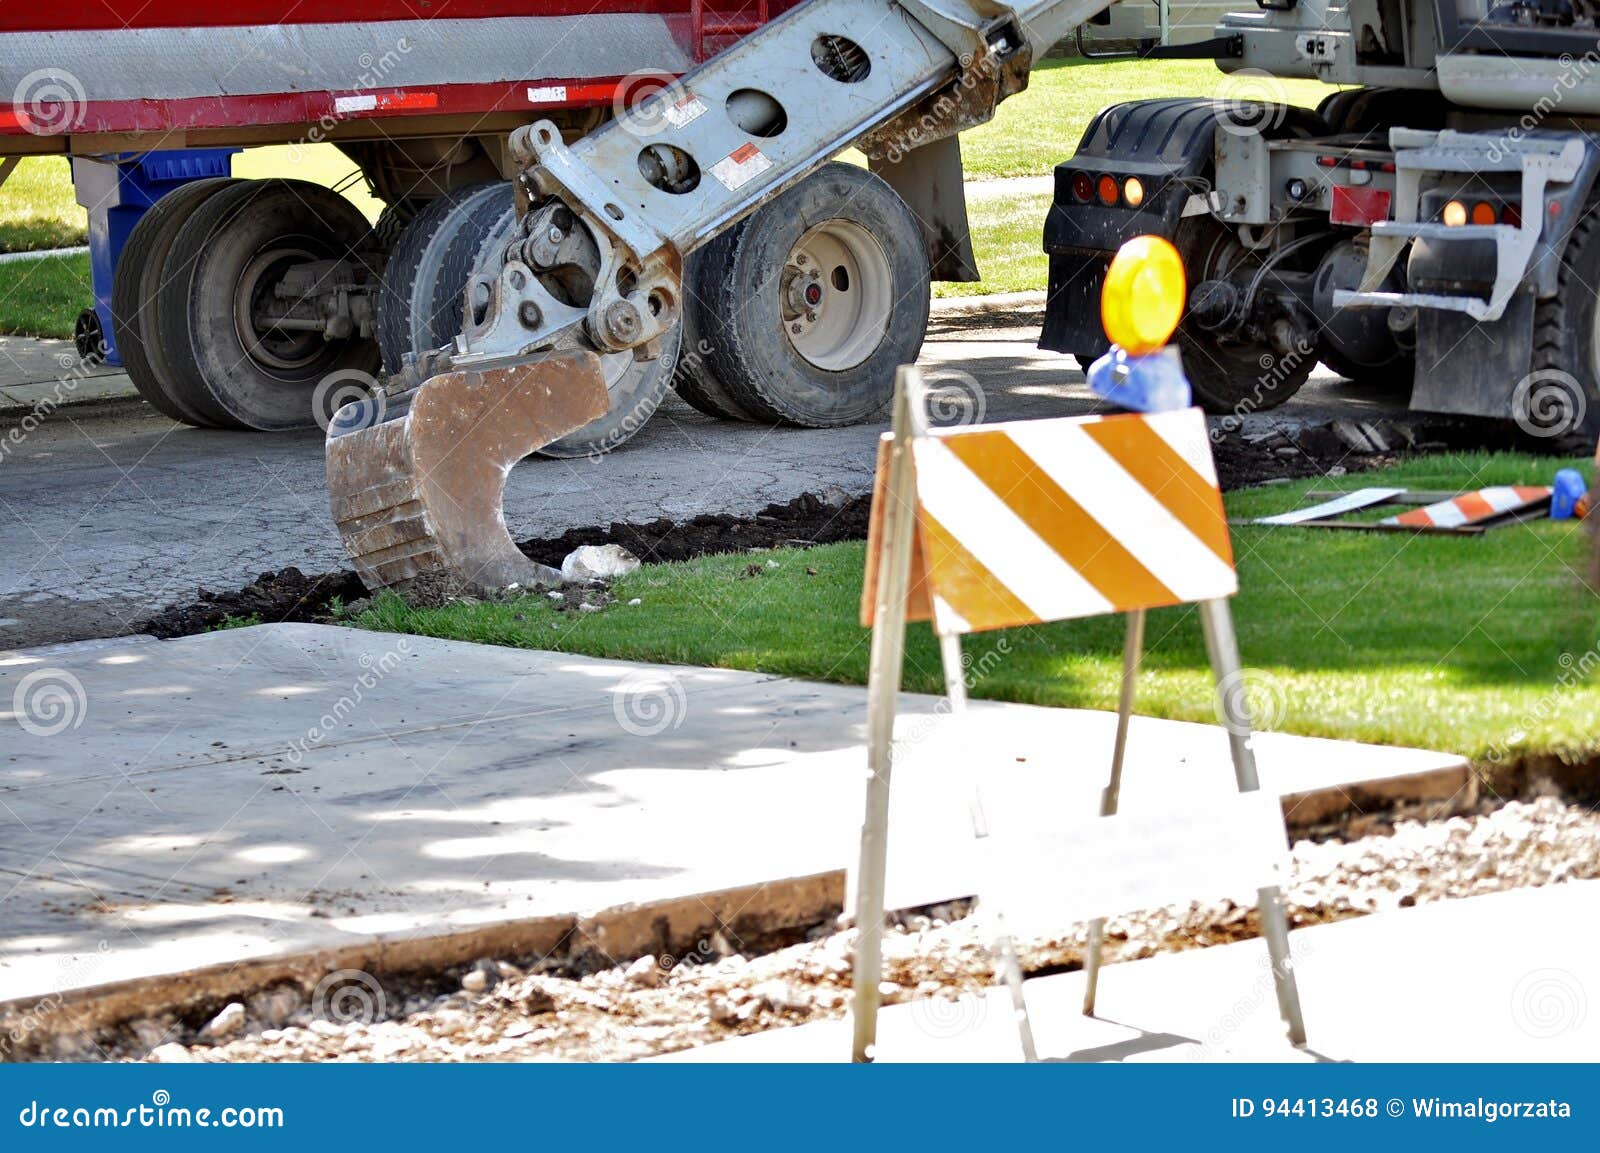 street and sidewalk construction in mount prospect il, usa.